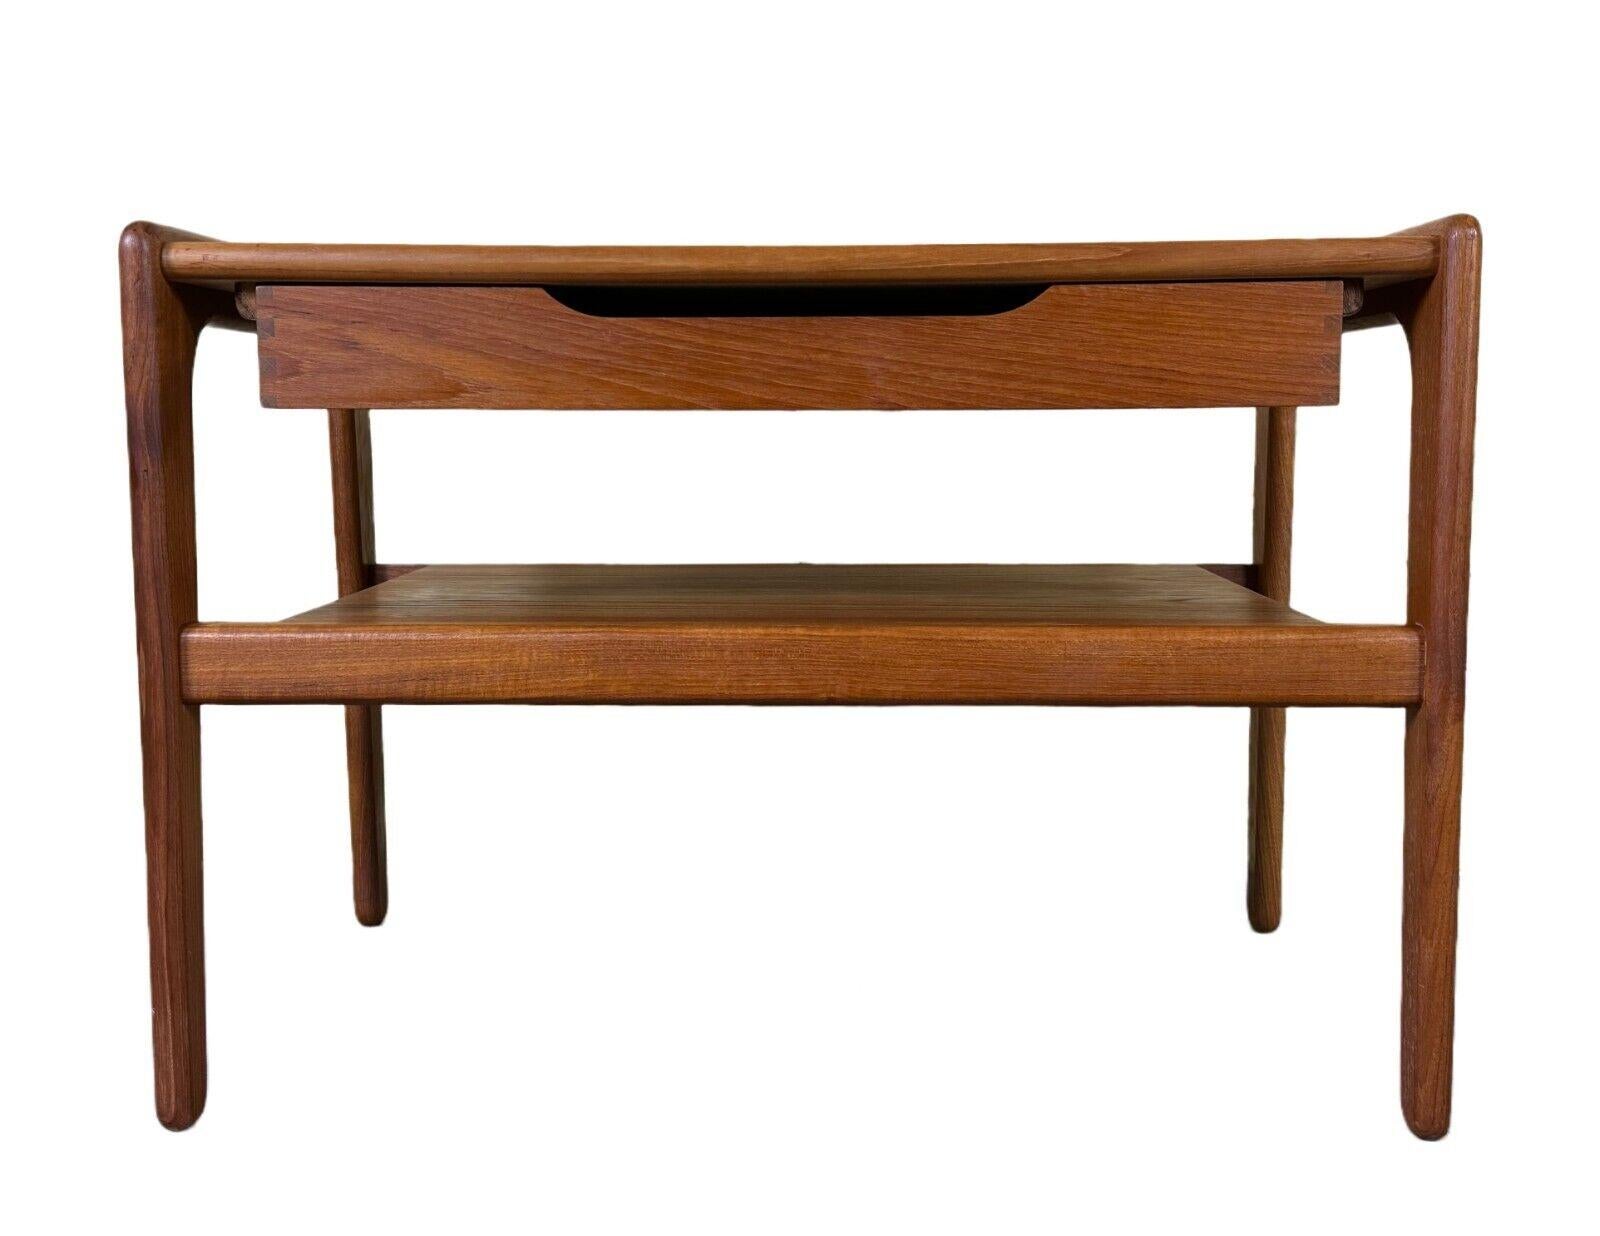 60s 70s teak side table with drawer Arne Wahl Iversen Denmark

Object: side table

Manufacturer:

Condition: good - vintage

Age: around 1960-1970

Dimensions:

Width = 70cm
Depth = 44cm
Height = 49cm

Material: teak

Other notes:

The pictures